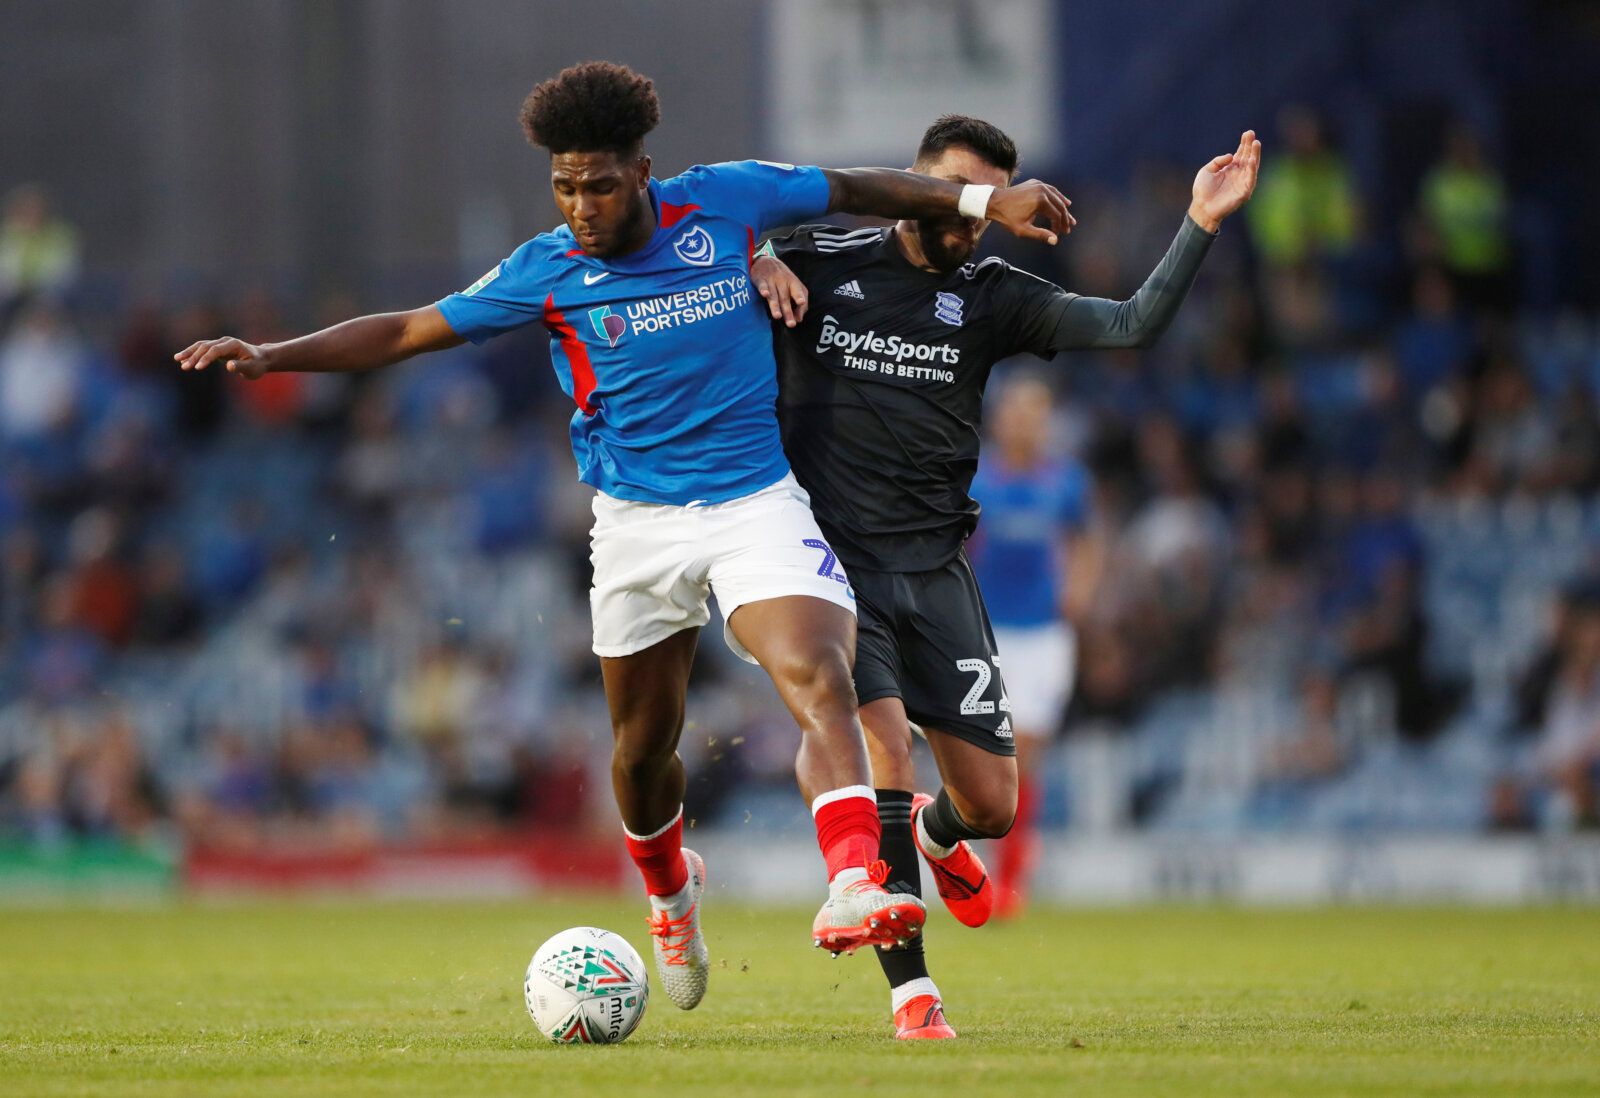 Soccer Football - Carabao Cup First Round - Portsmouth v Birmingham City - Fratton Park, Portsmouth, Britain - August 6, 2019   Portsmouth's Ellis Harrison in action with Birmingham City's Agustin Medina      Action Images/Matthew Childs    EDITORIAL USE ONLY. No use with unauthorized audio, video, data, fixture lists, club/league logos or "live" services. Online in-match use limited to 75 images, no video emulation. No use in betting, games or single club/league/player publications.  Please con